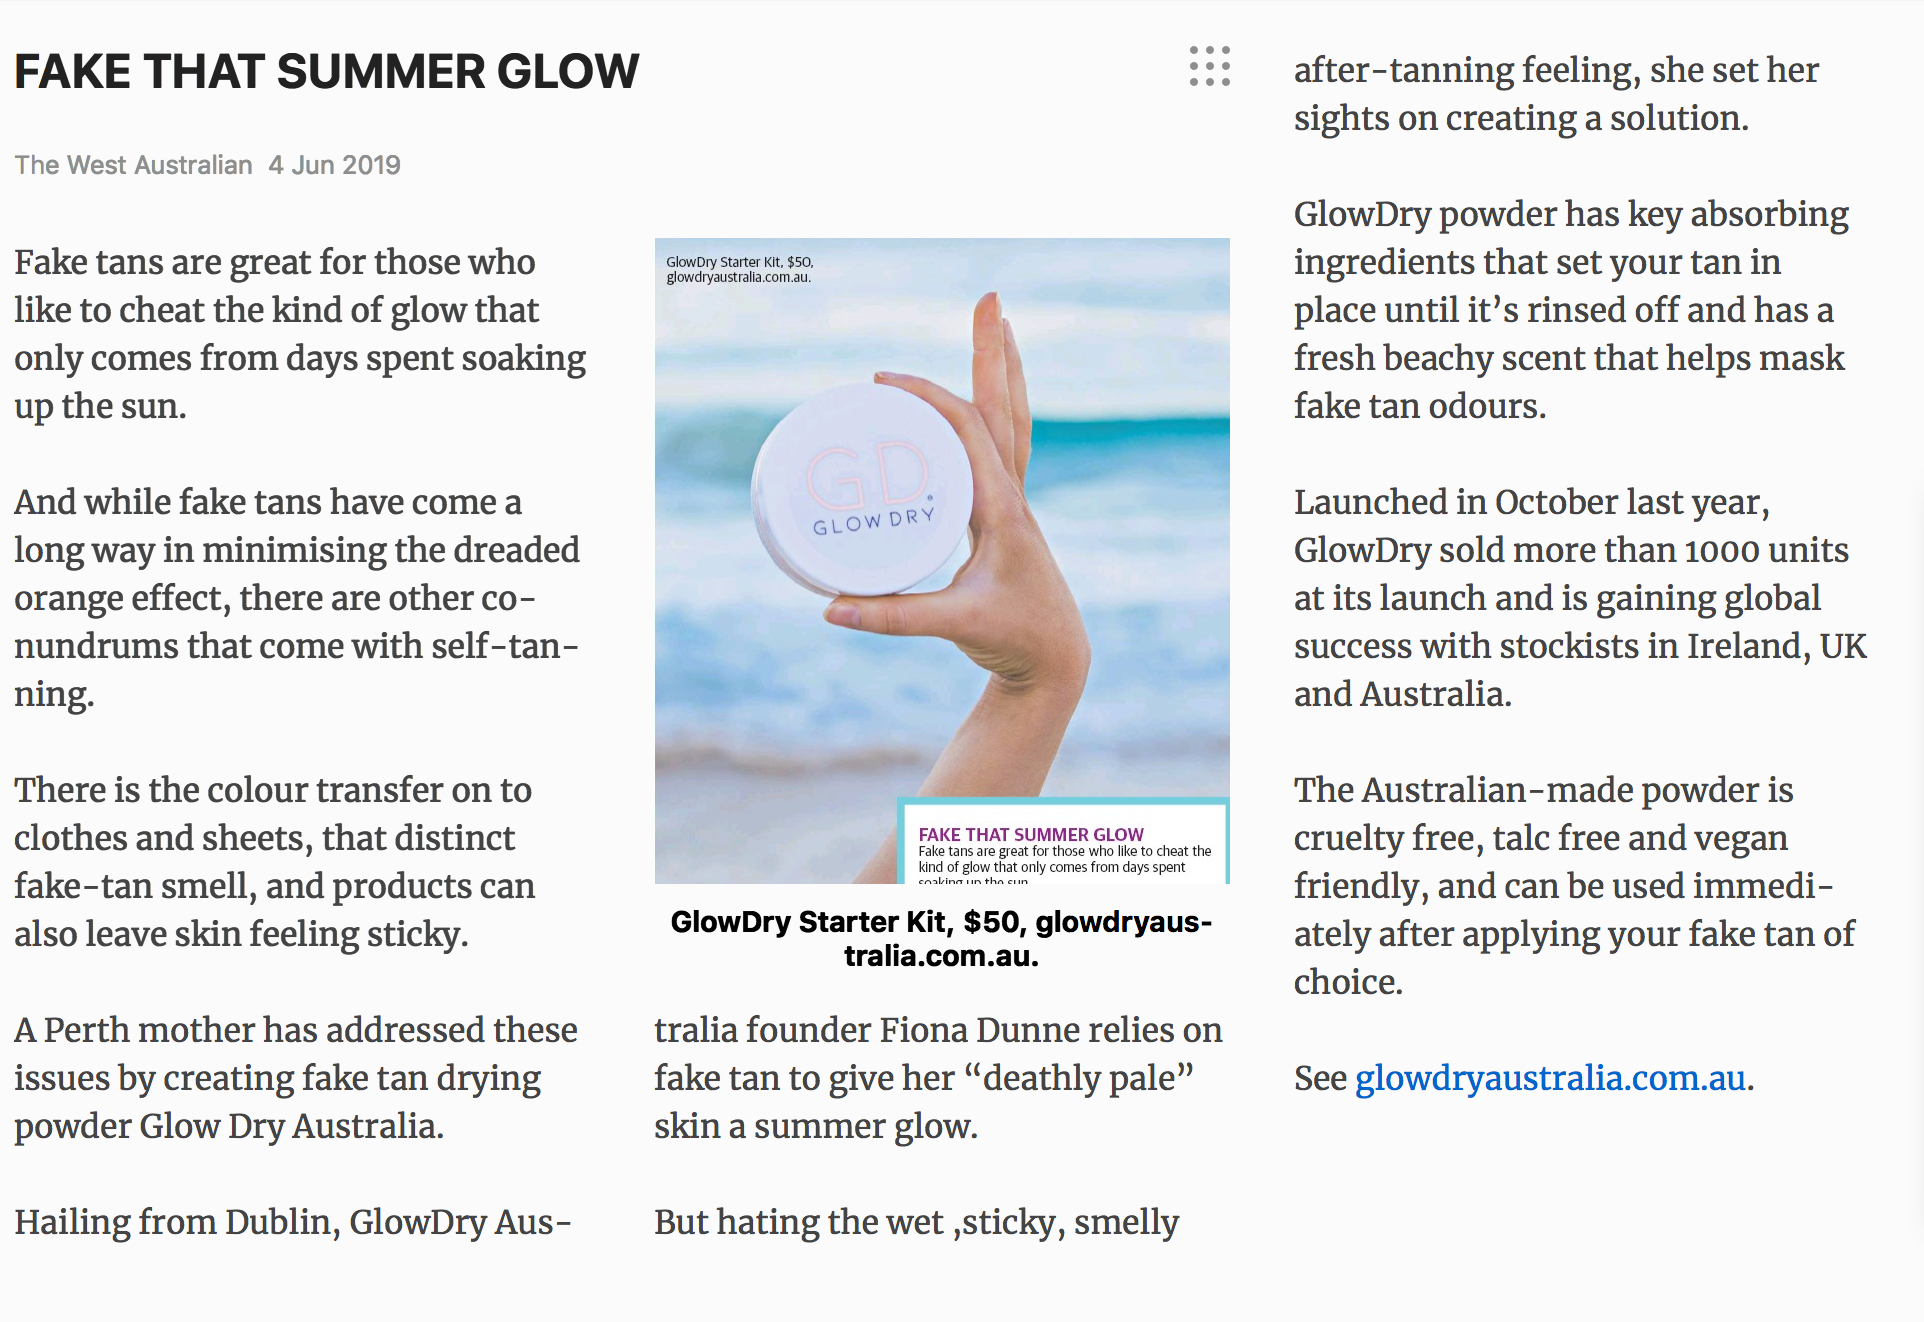 Fake that summer glow - The West Australian Article June 2019